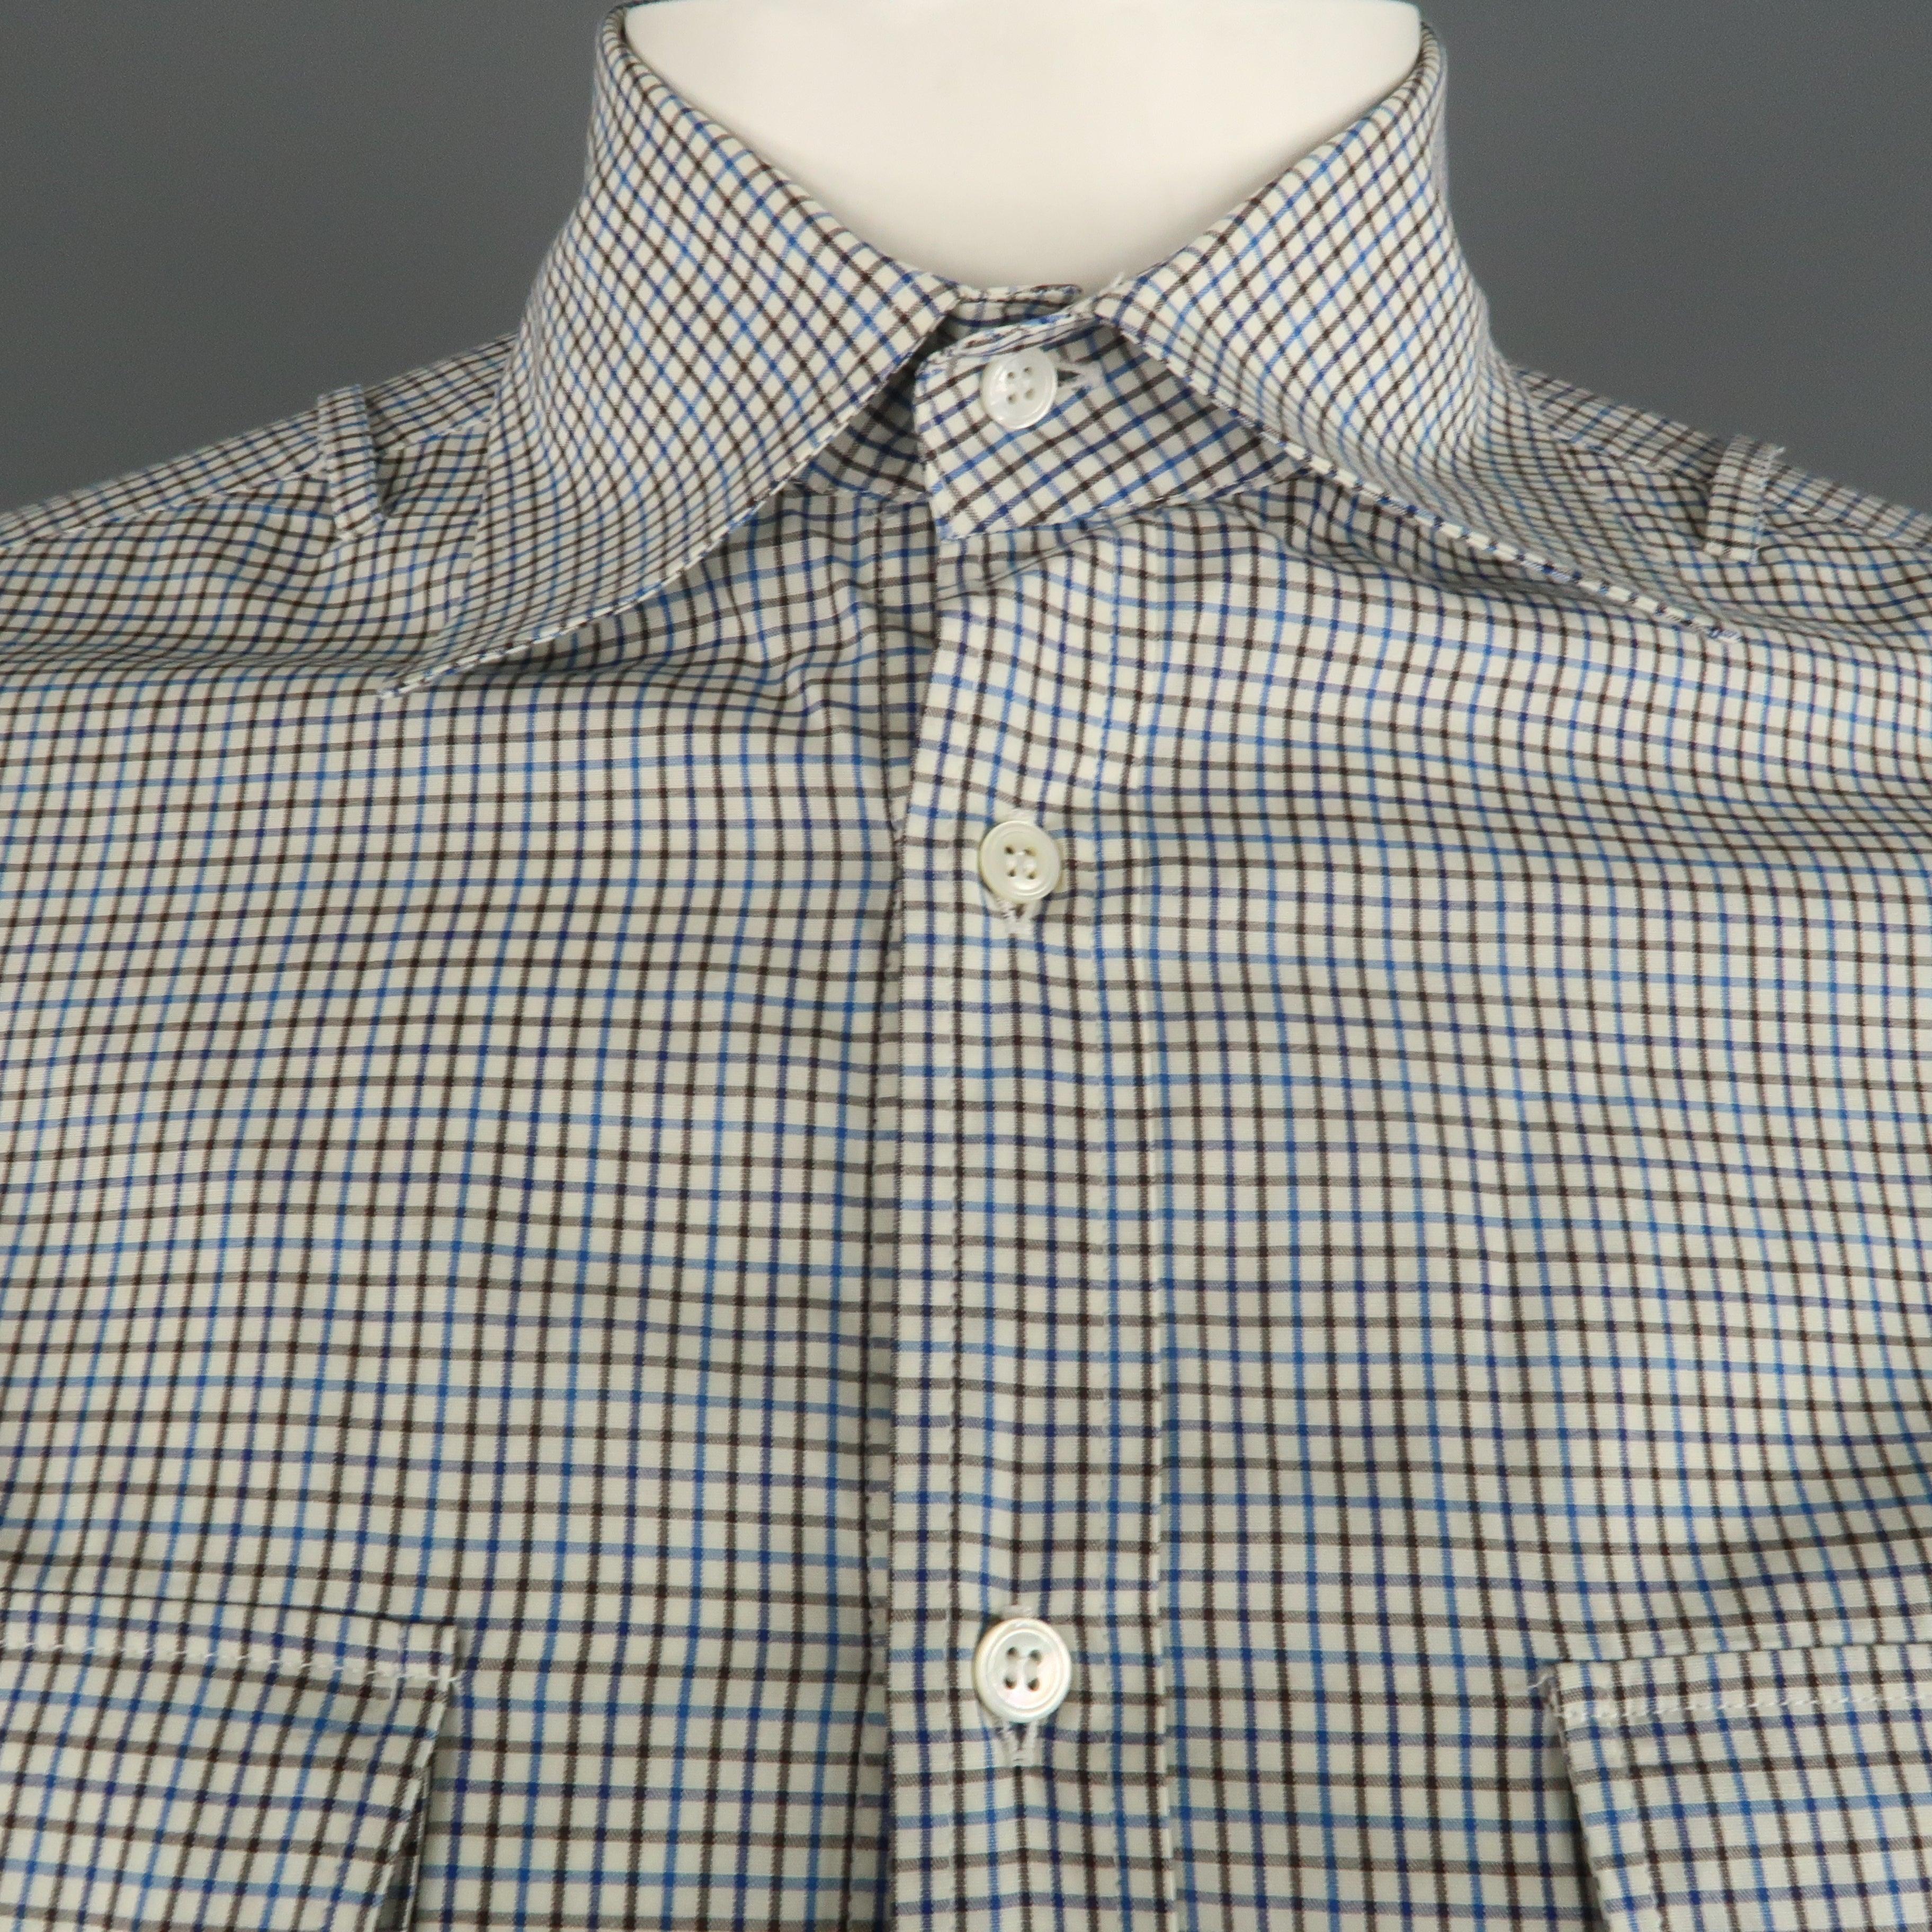 MICHAEL BASTIAN lone sleeve shirt comes in a blue and brown plaid featuring a spread collar and front patch pockets. Made in Italy
Excellent Pre-Owned Condition.
 

Marked:   39/15.5 
 

Measurements: 
  
l	Shoulder: 18.5 inches  
l	Chest: 40 inches